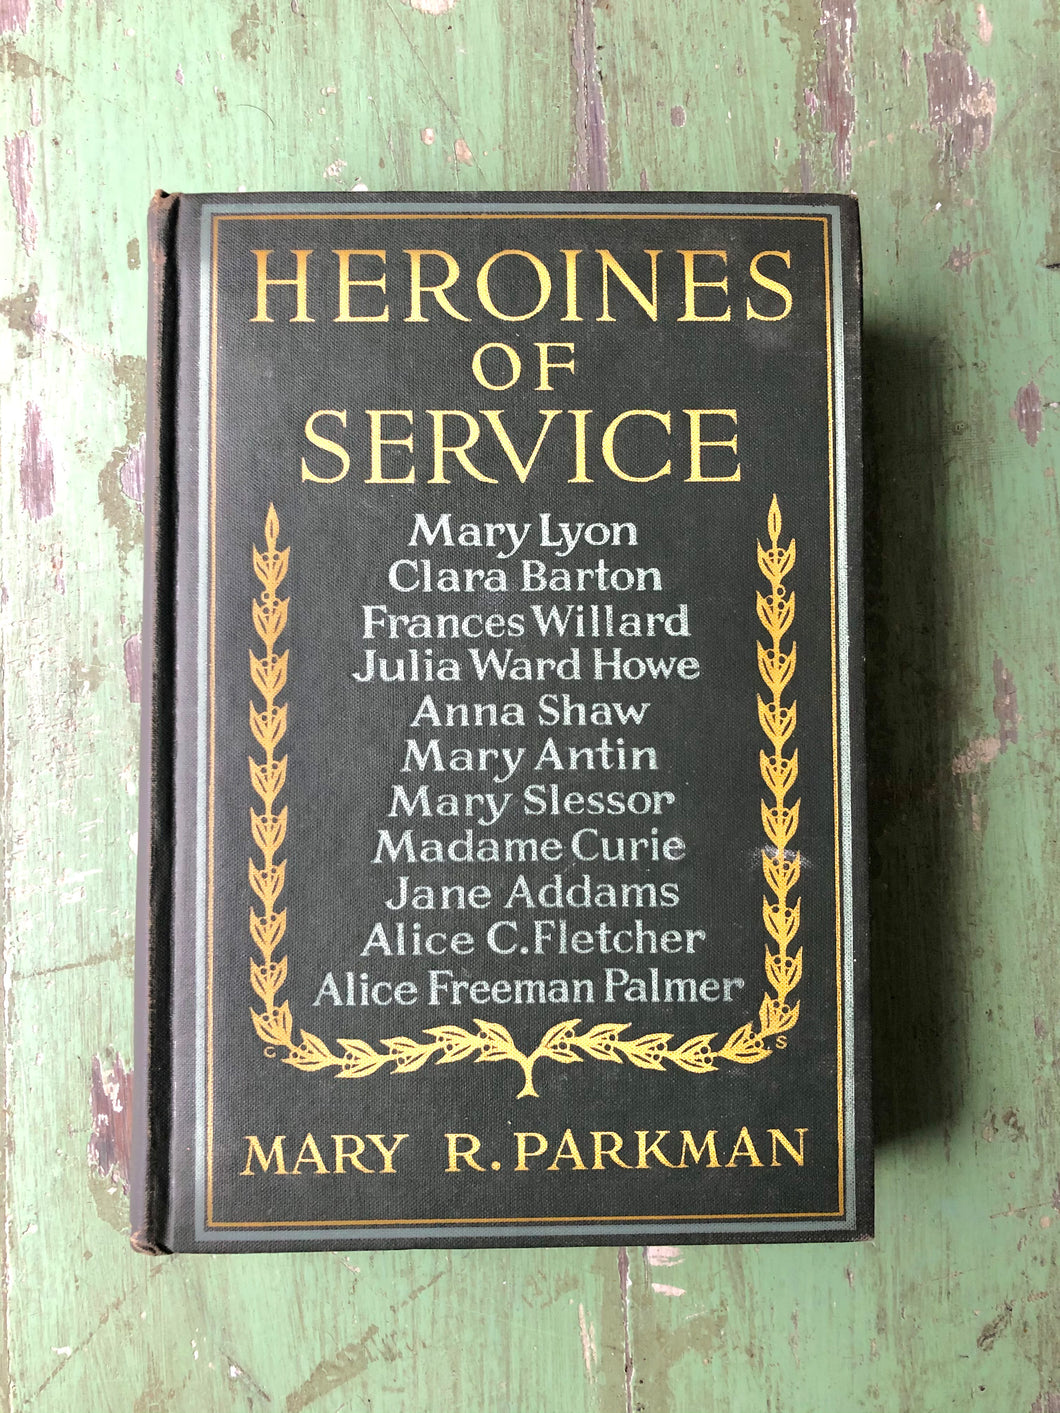 Heroines of Service by Mary R. Parkman